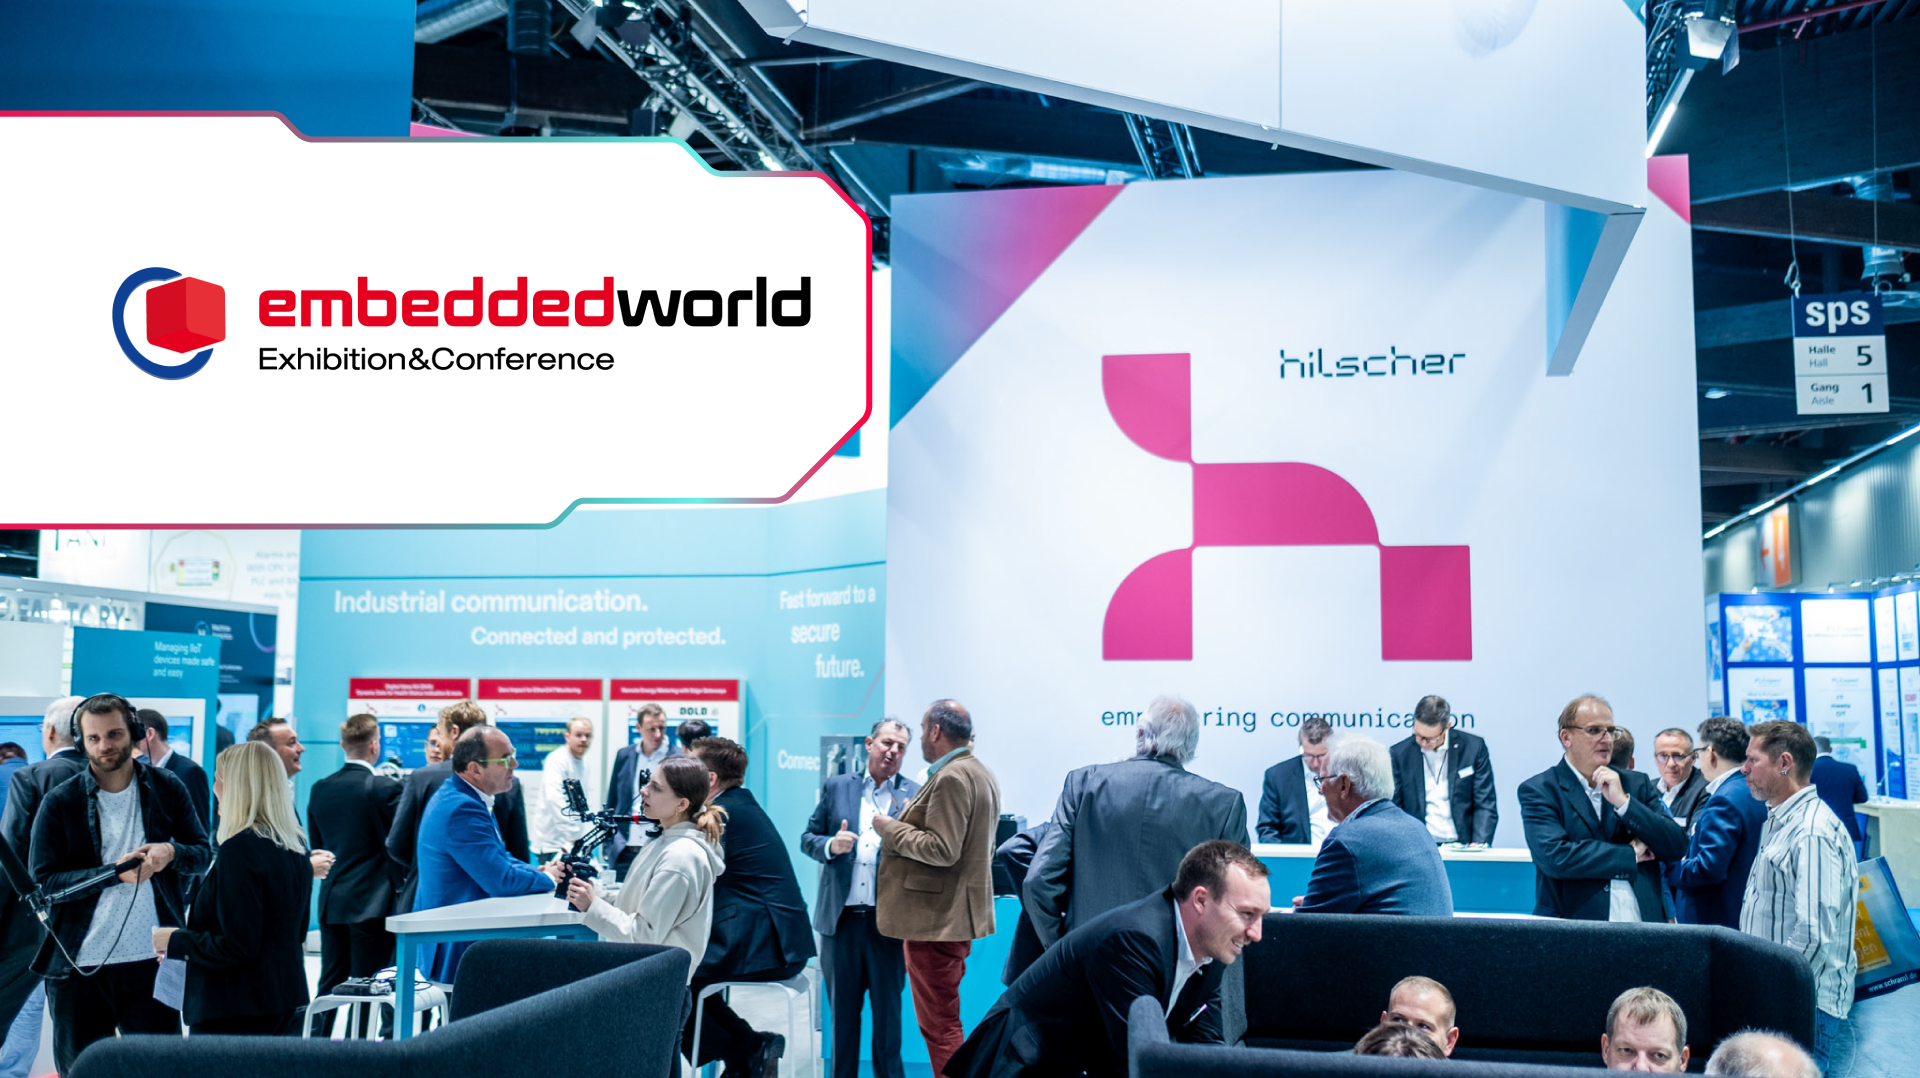 A crowded trade fair booth with numerous people in deep discussion. In the back is a large Hilscher logo on white background. In the top right corner is the embedded world logo.